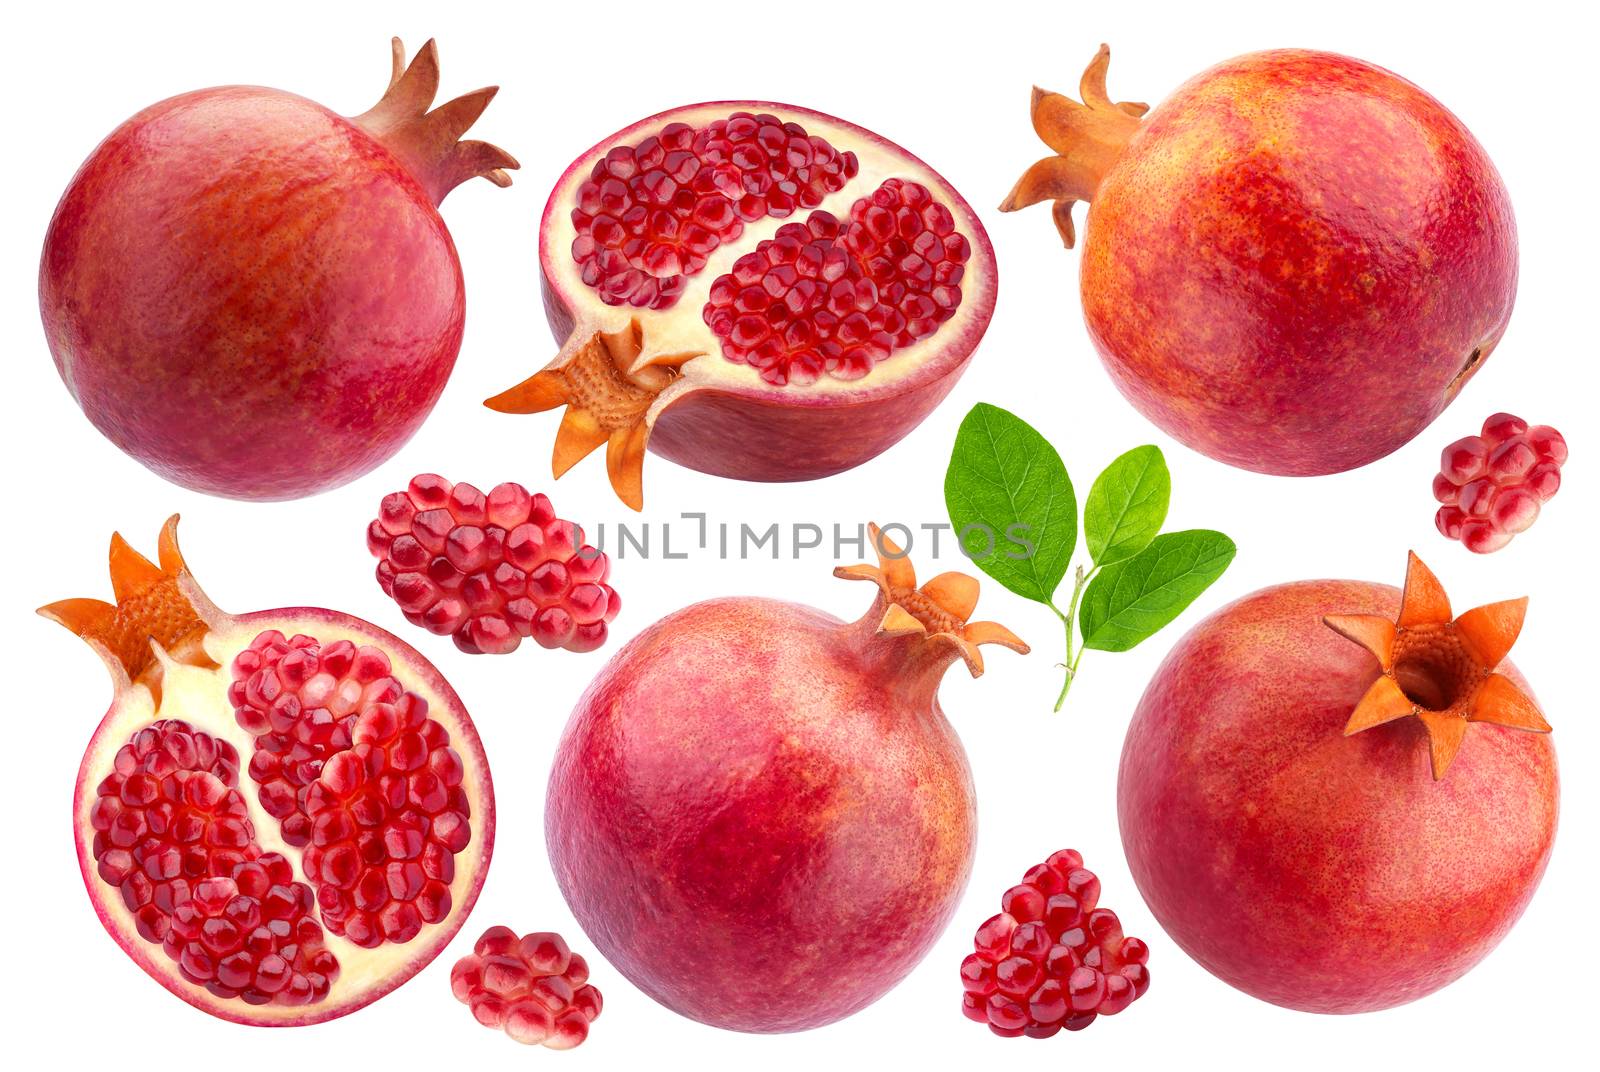 Pomegranate isolated on white background, collection by xamtiw